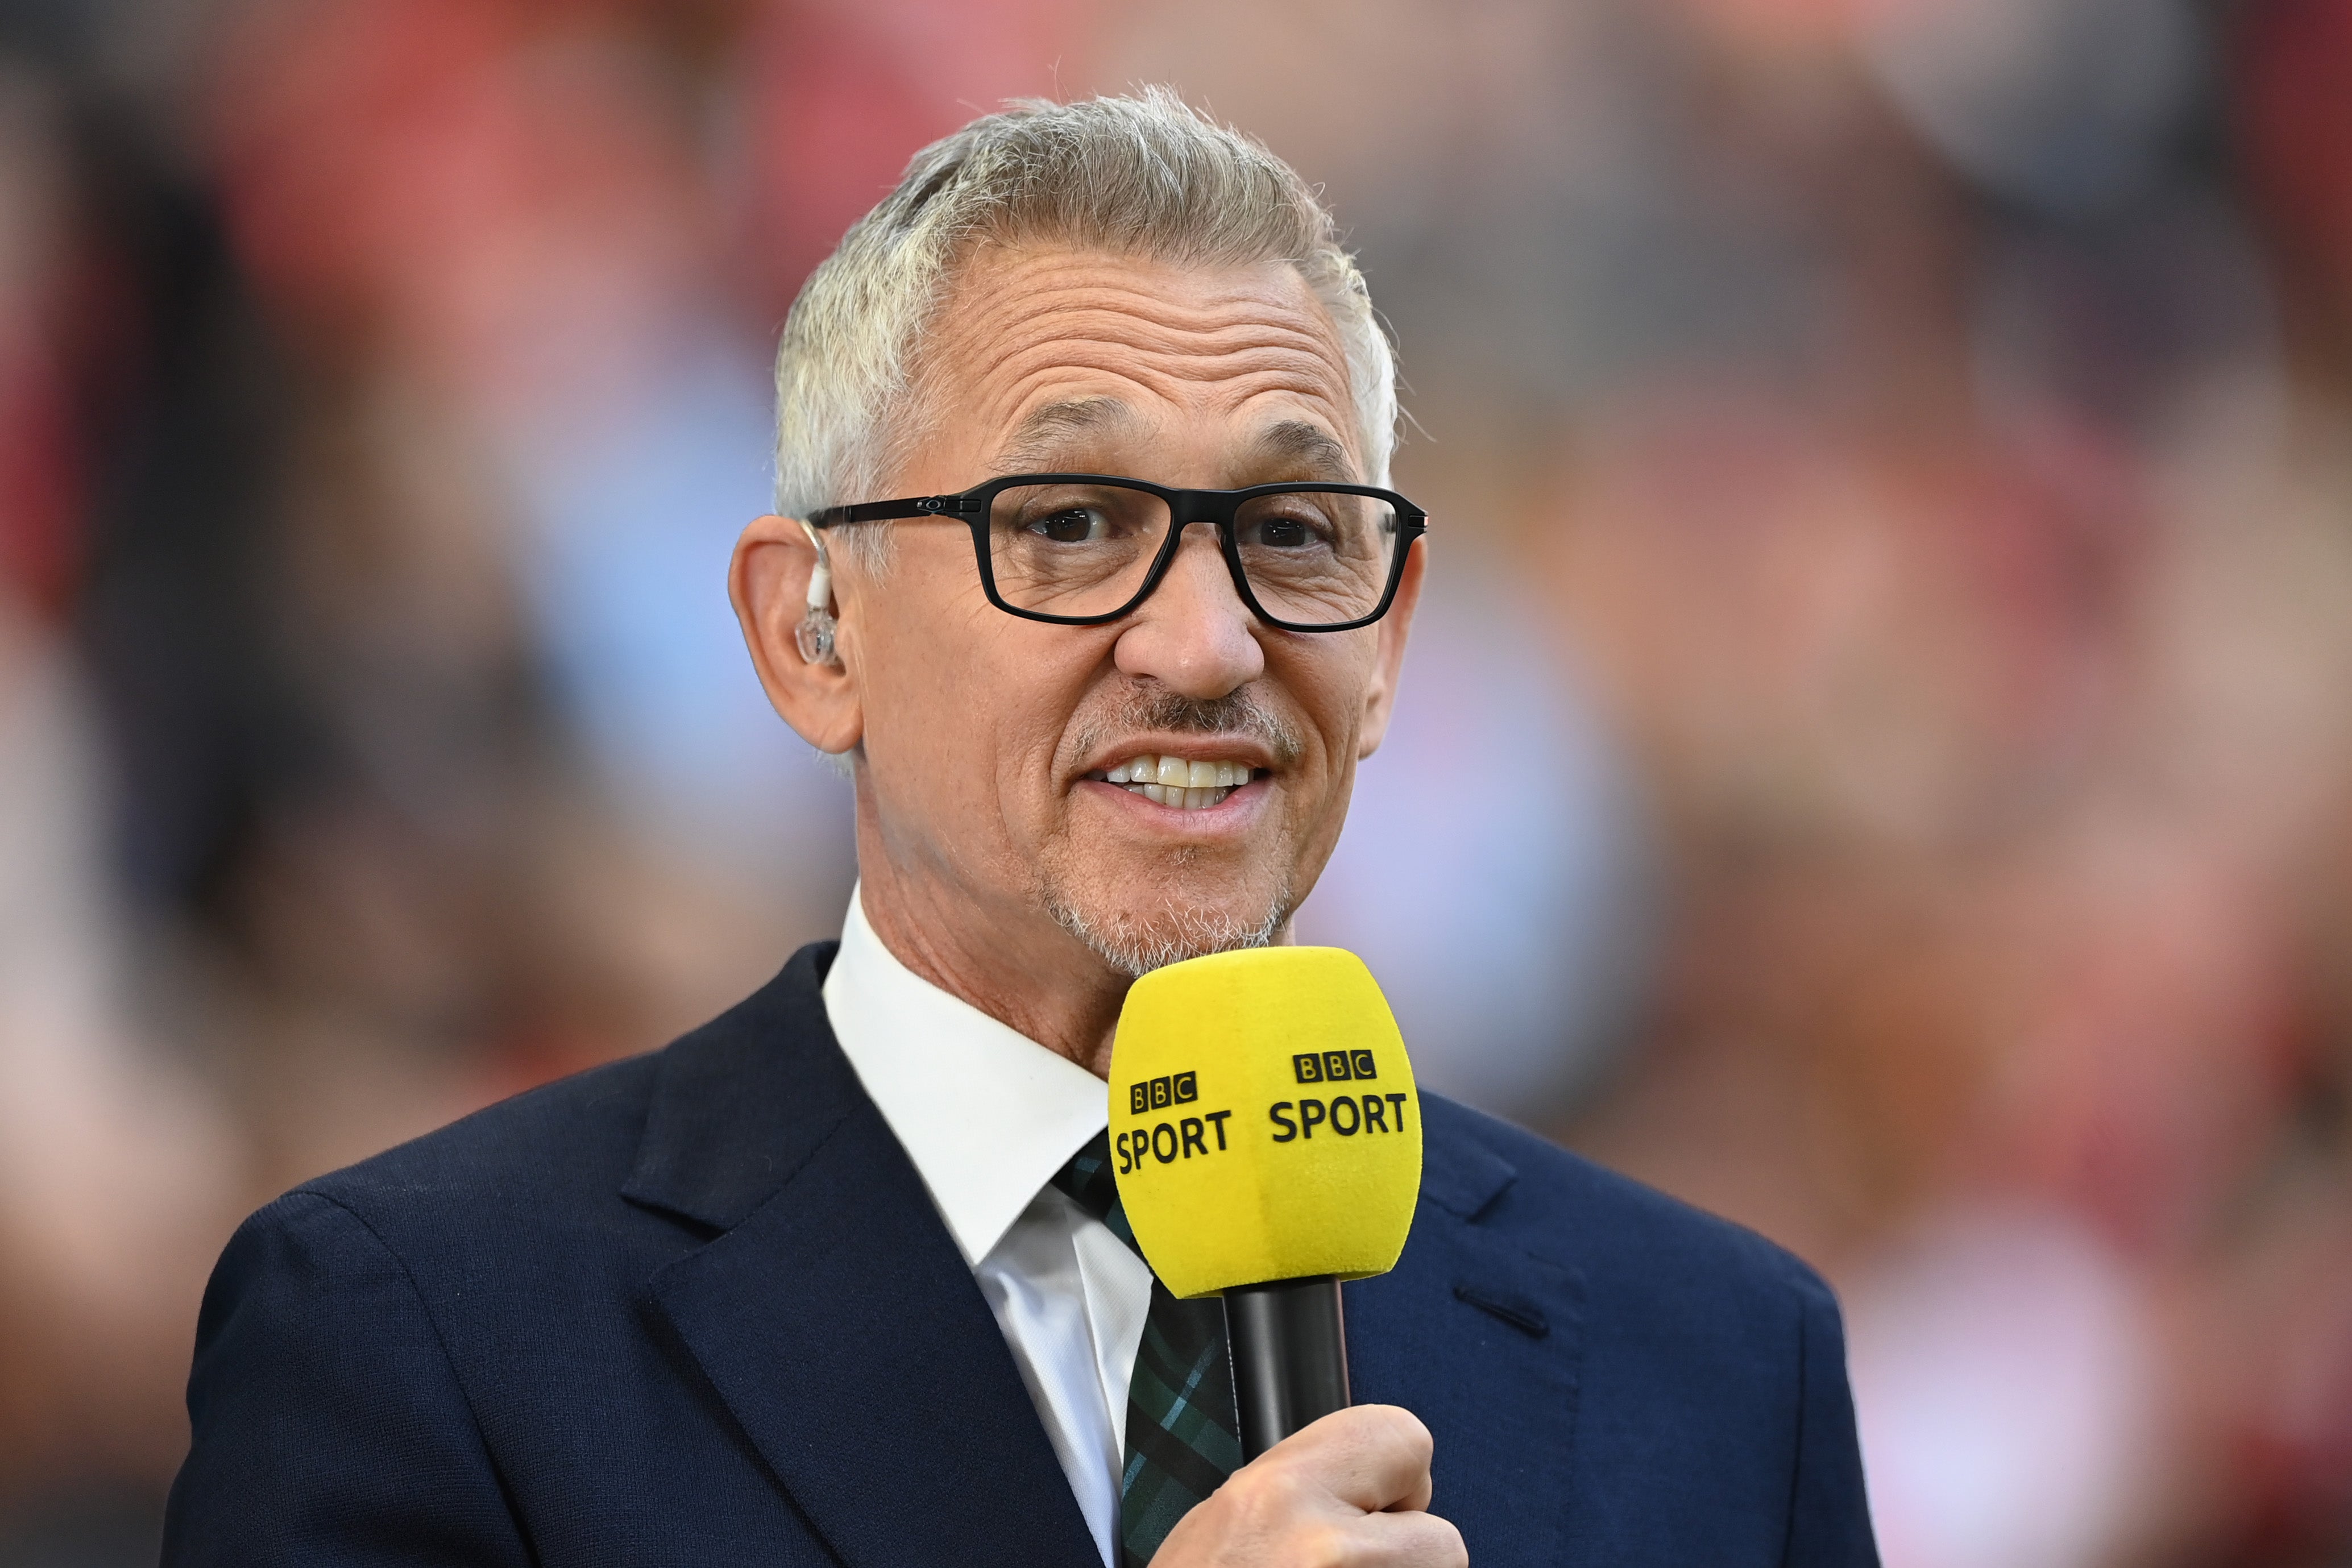 Lineker said he knows of two gay players in the Premier League